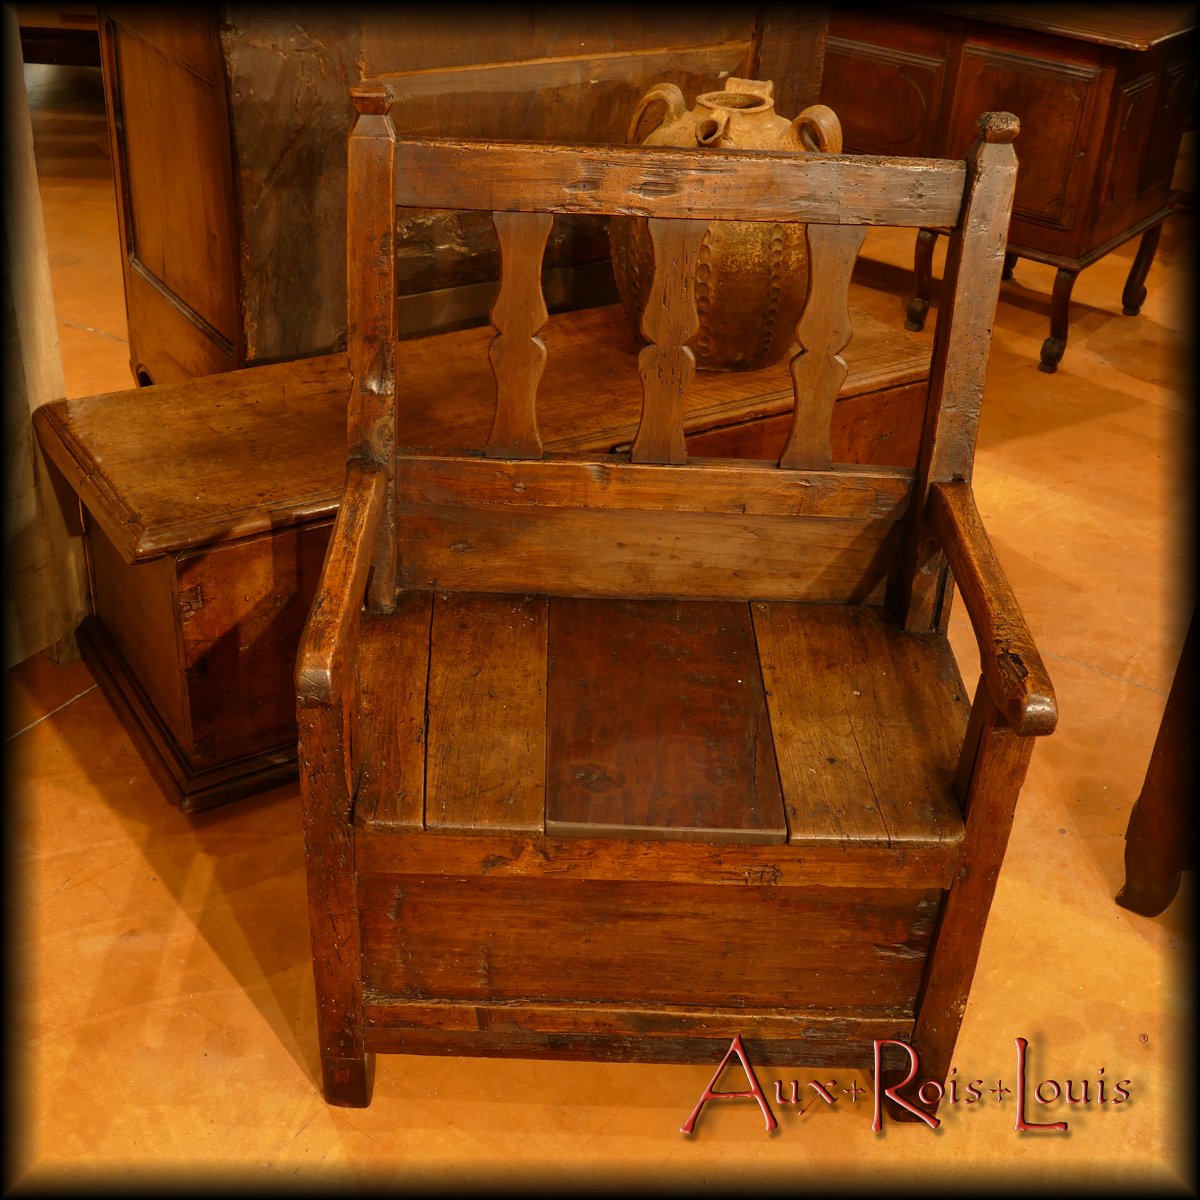 Chest armchair made from chestnut, cherry and poplar planks in a farm in Quercy in the 19th century.